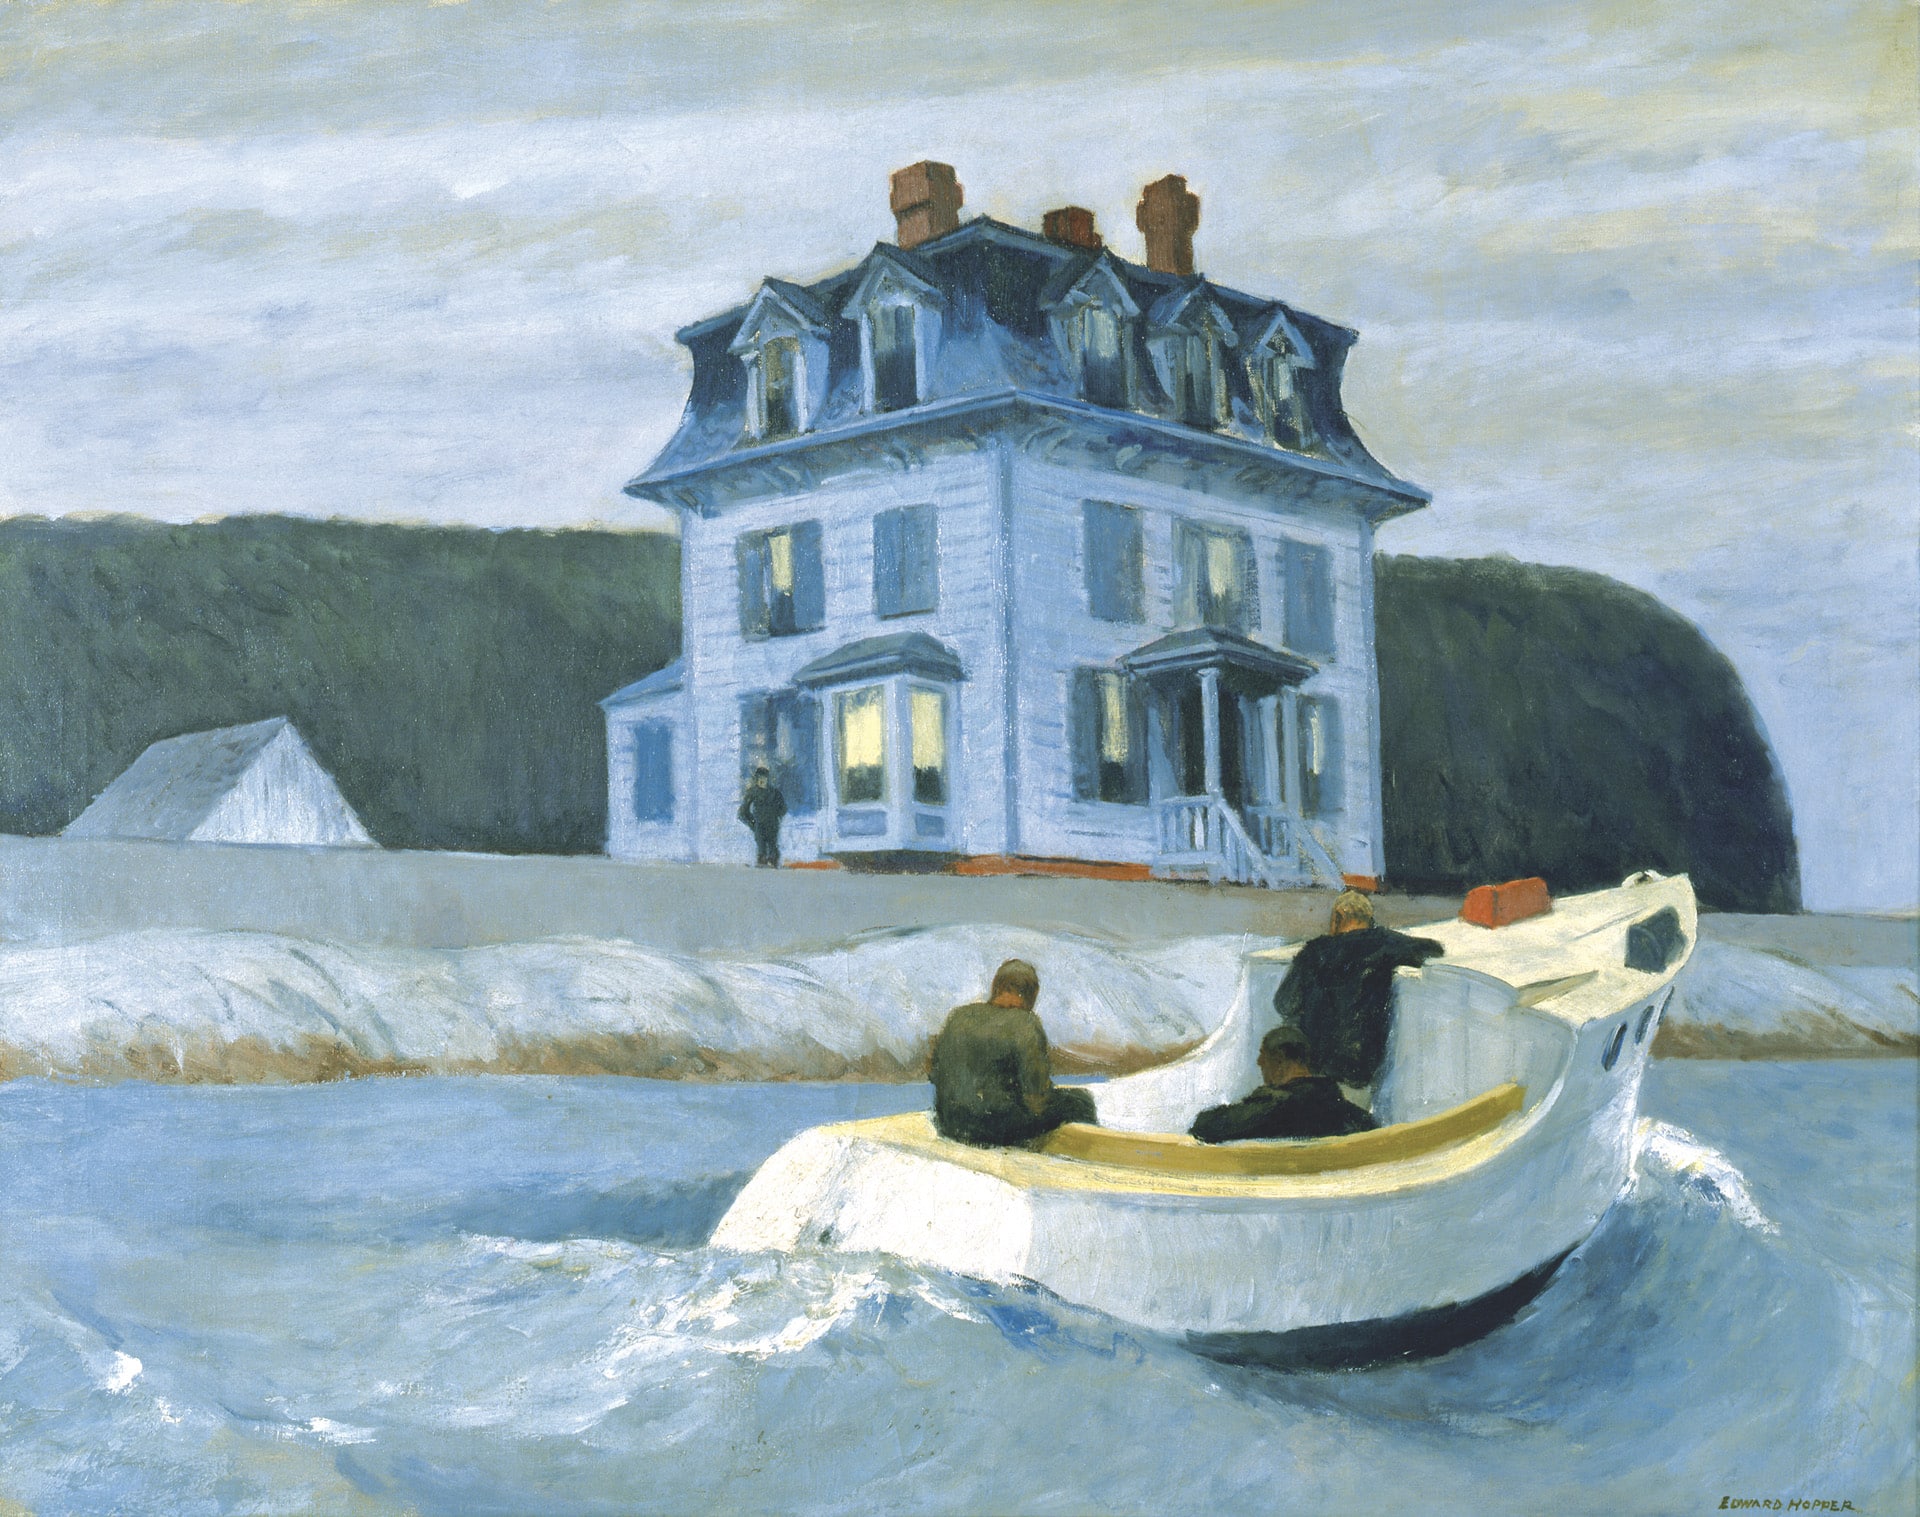 a painting of 3 men in a boat approaching the shore where a blue house stands against a cliff in the background